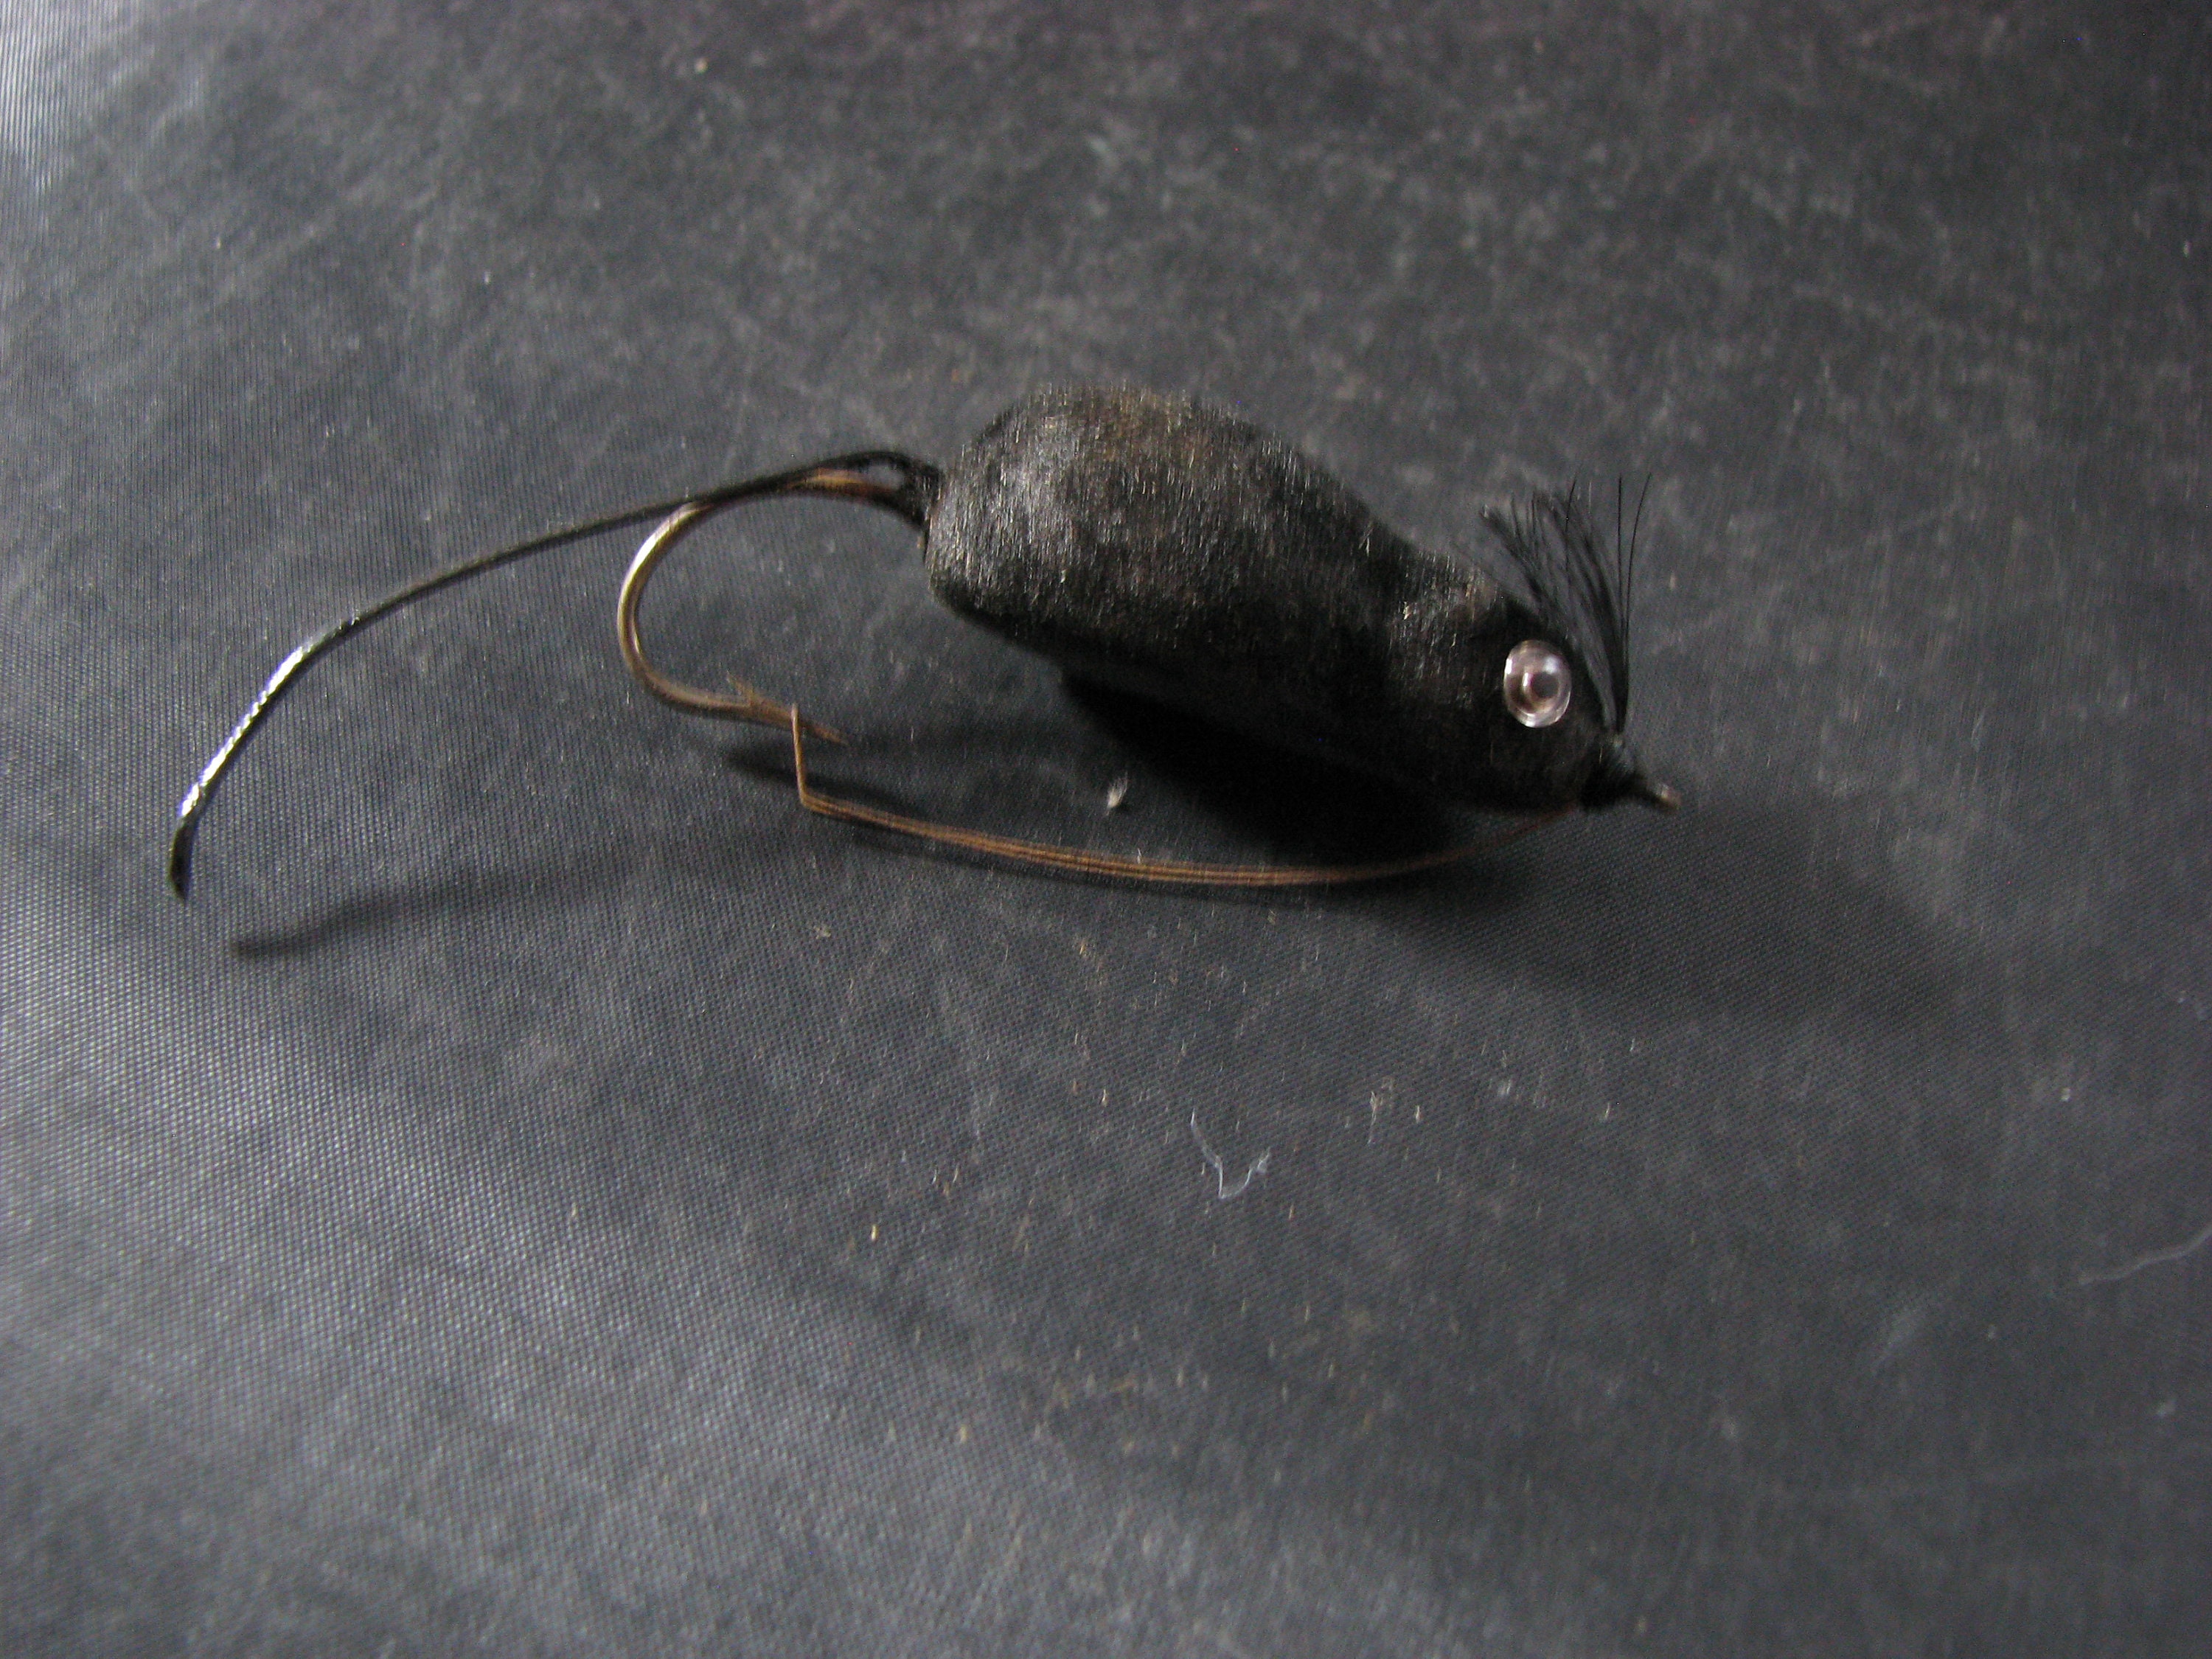 Vintage Mouse Fishing Lure -  Canada